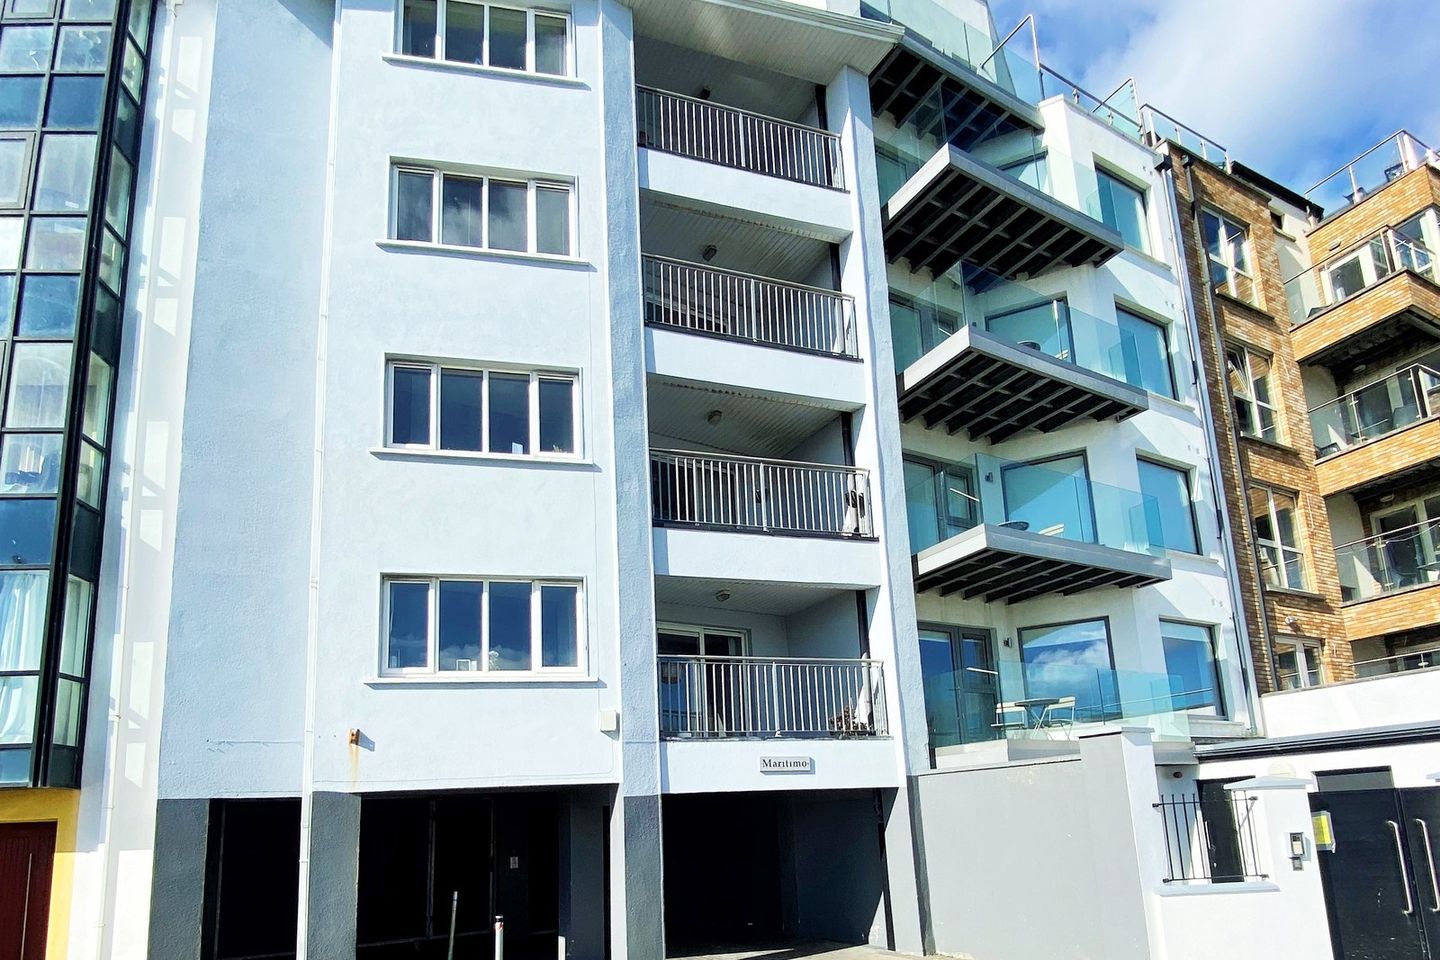 Apartment 7, Maritimo, Quincentennial Drive, Salthill, Co. Galway, H91W2N0